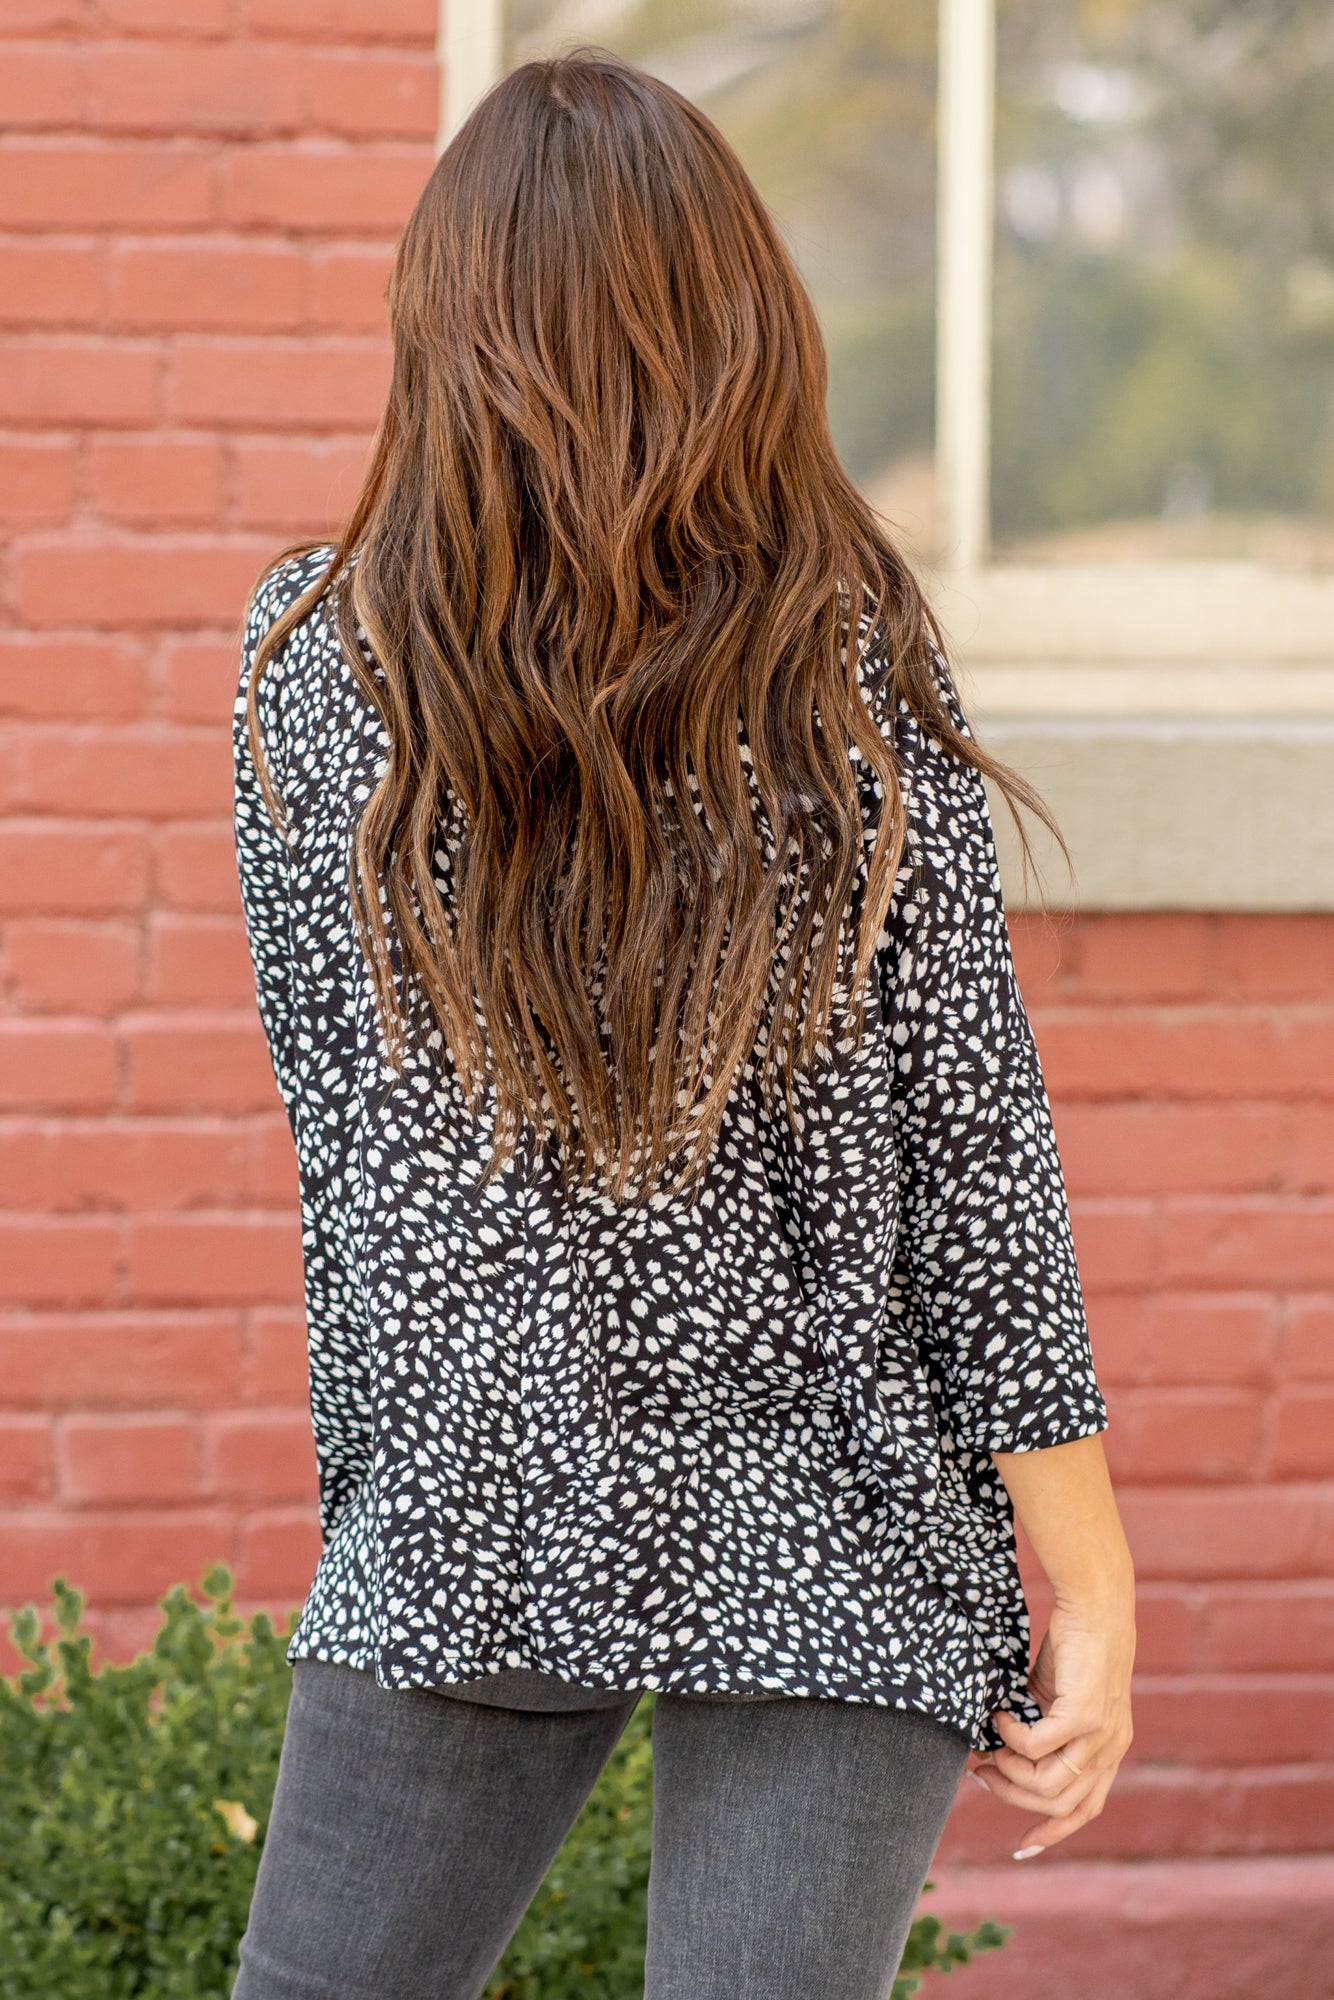 Hem & Thread   Feel comfortable and cute in this leopard knit top. Pair with your favorite jeans and booties for an early fall vibe.   Neckline: Round Neck Sleeve: Mid Length Style #: 31014F-Black Contact us for any additional measurements or sizing.   